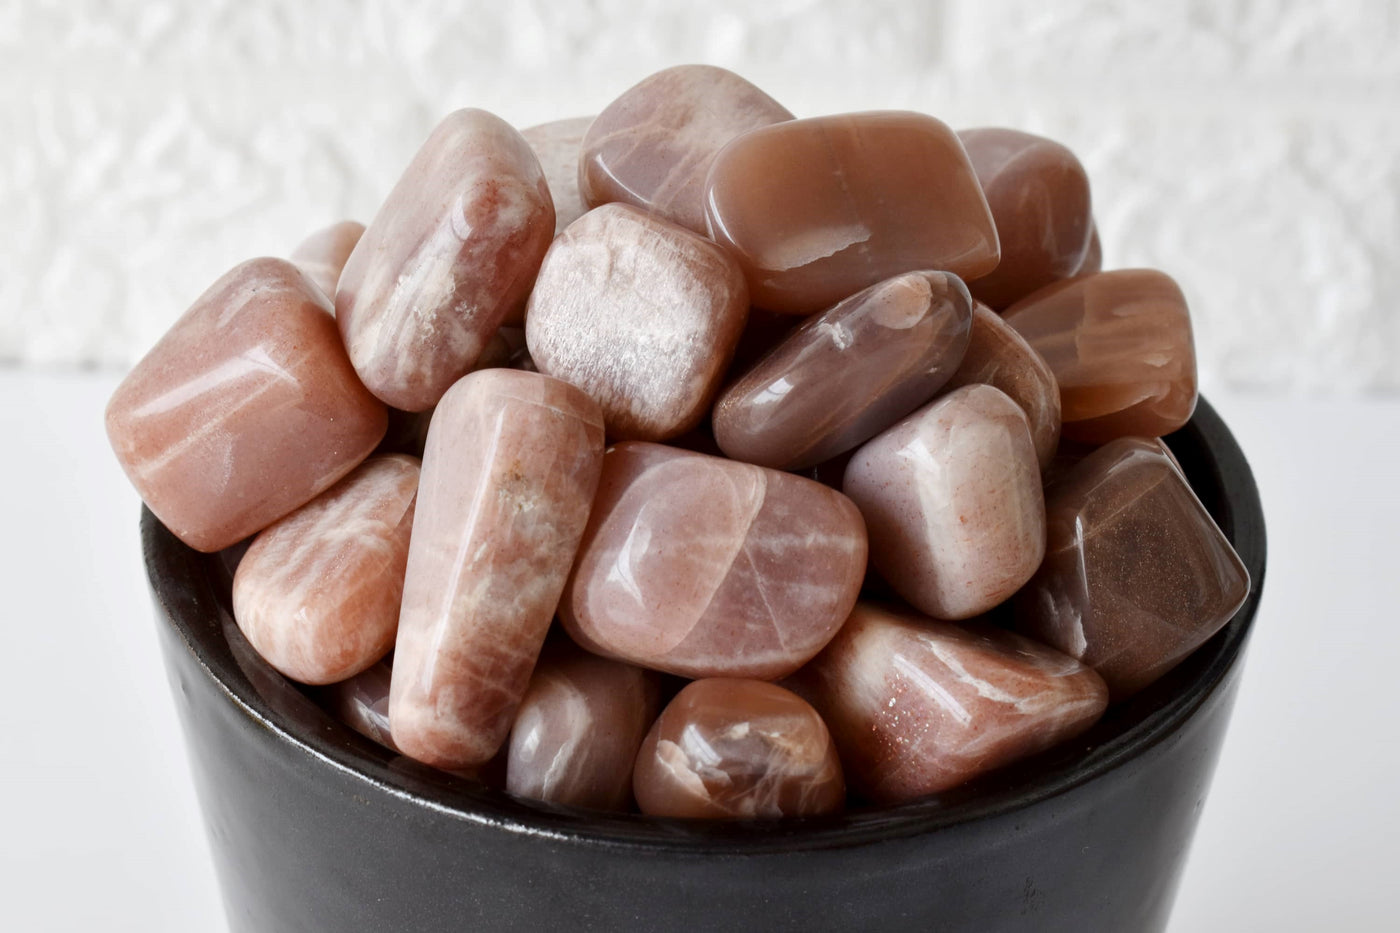 Moonstone Tumbled Crystals(Creativity and Emotional Understanding)